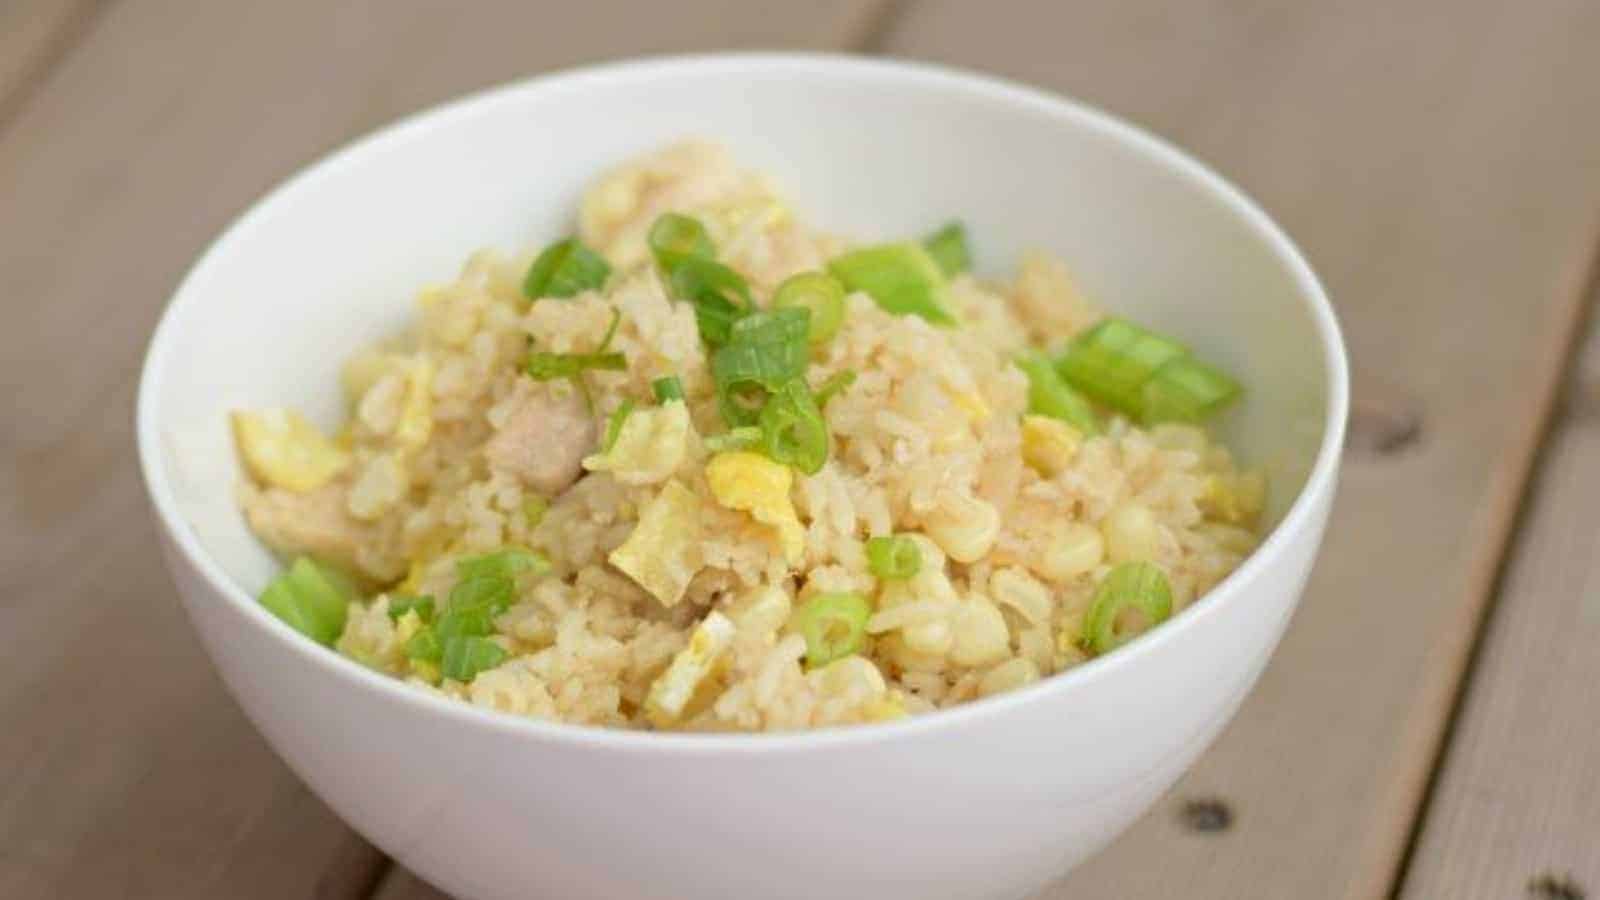 Images shows a white Bowl of chicken fried rice.